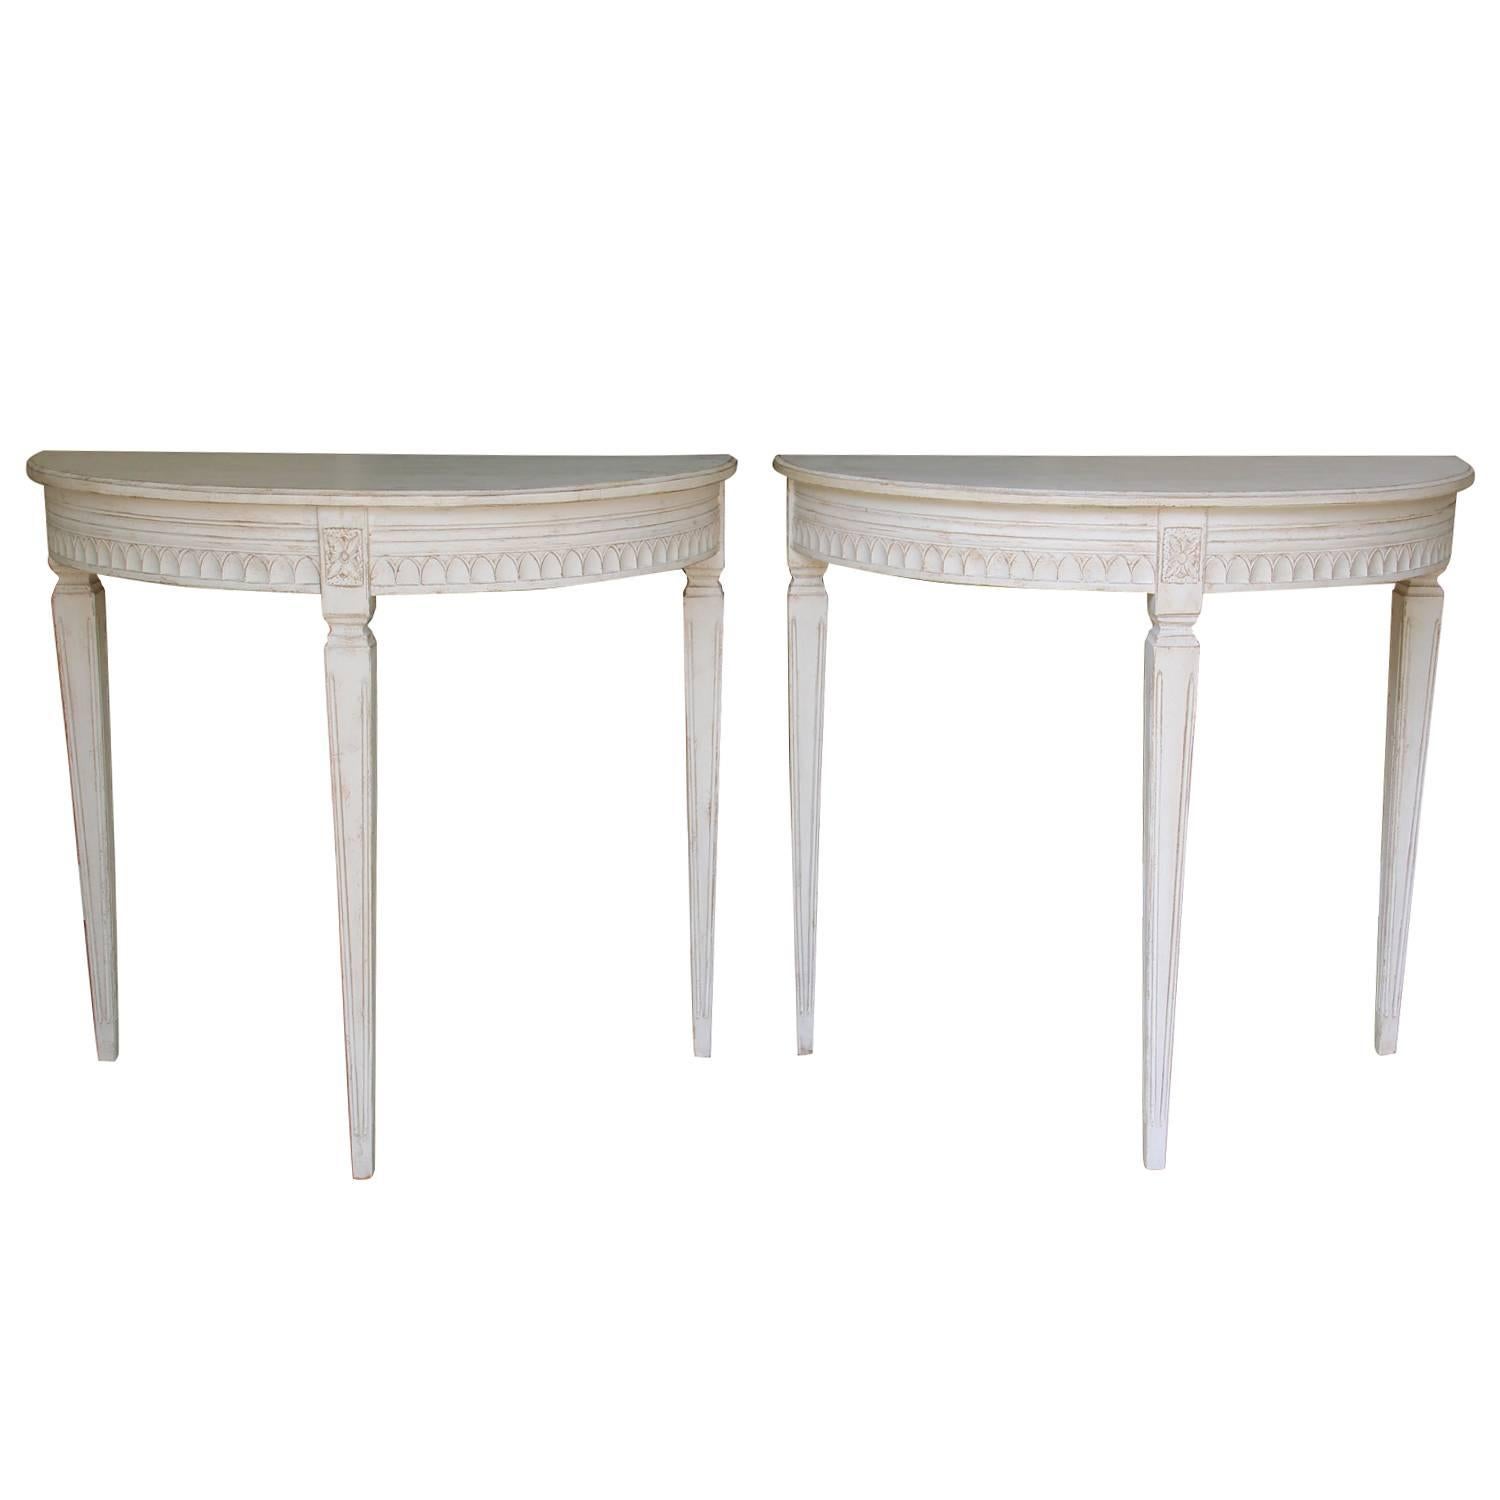 19th Century Pair of Swedish Gustavian Bedside Demilune Console Tables